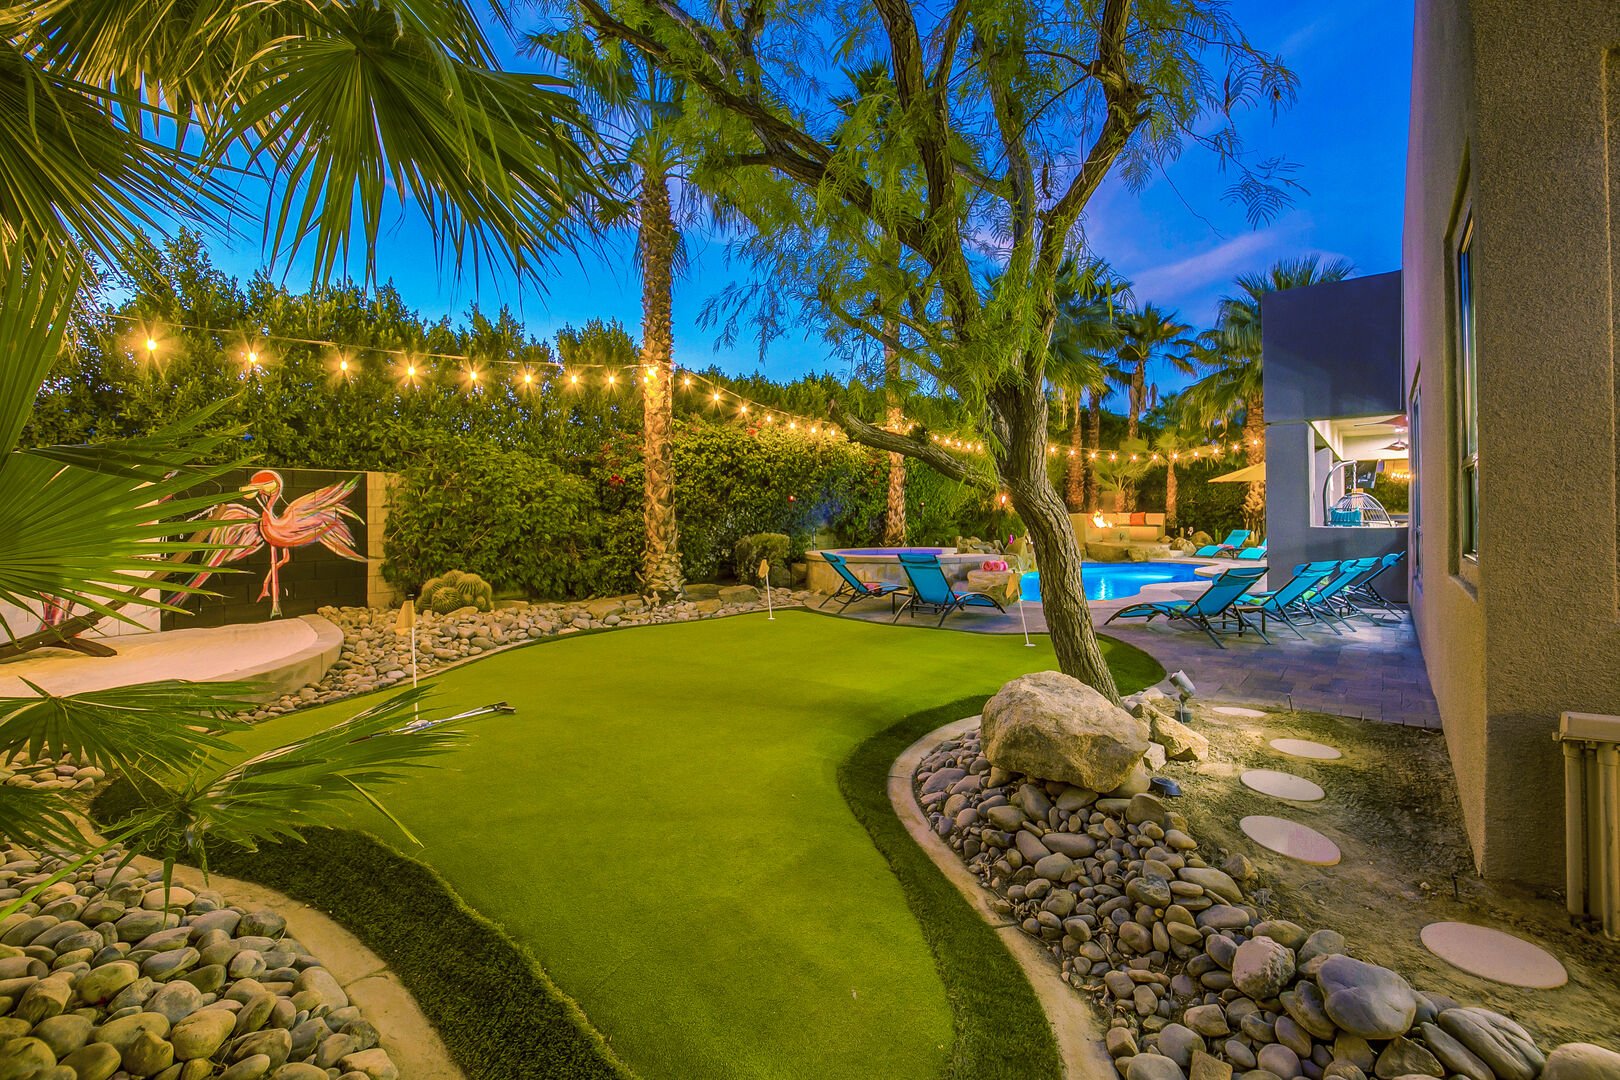 Enjoy some relaxing golf at the 3 hole putting green.